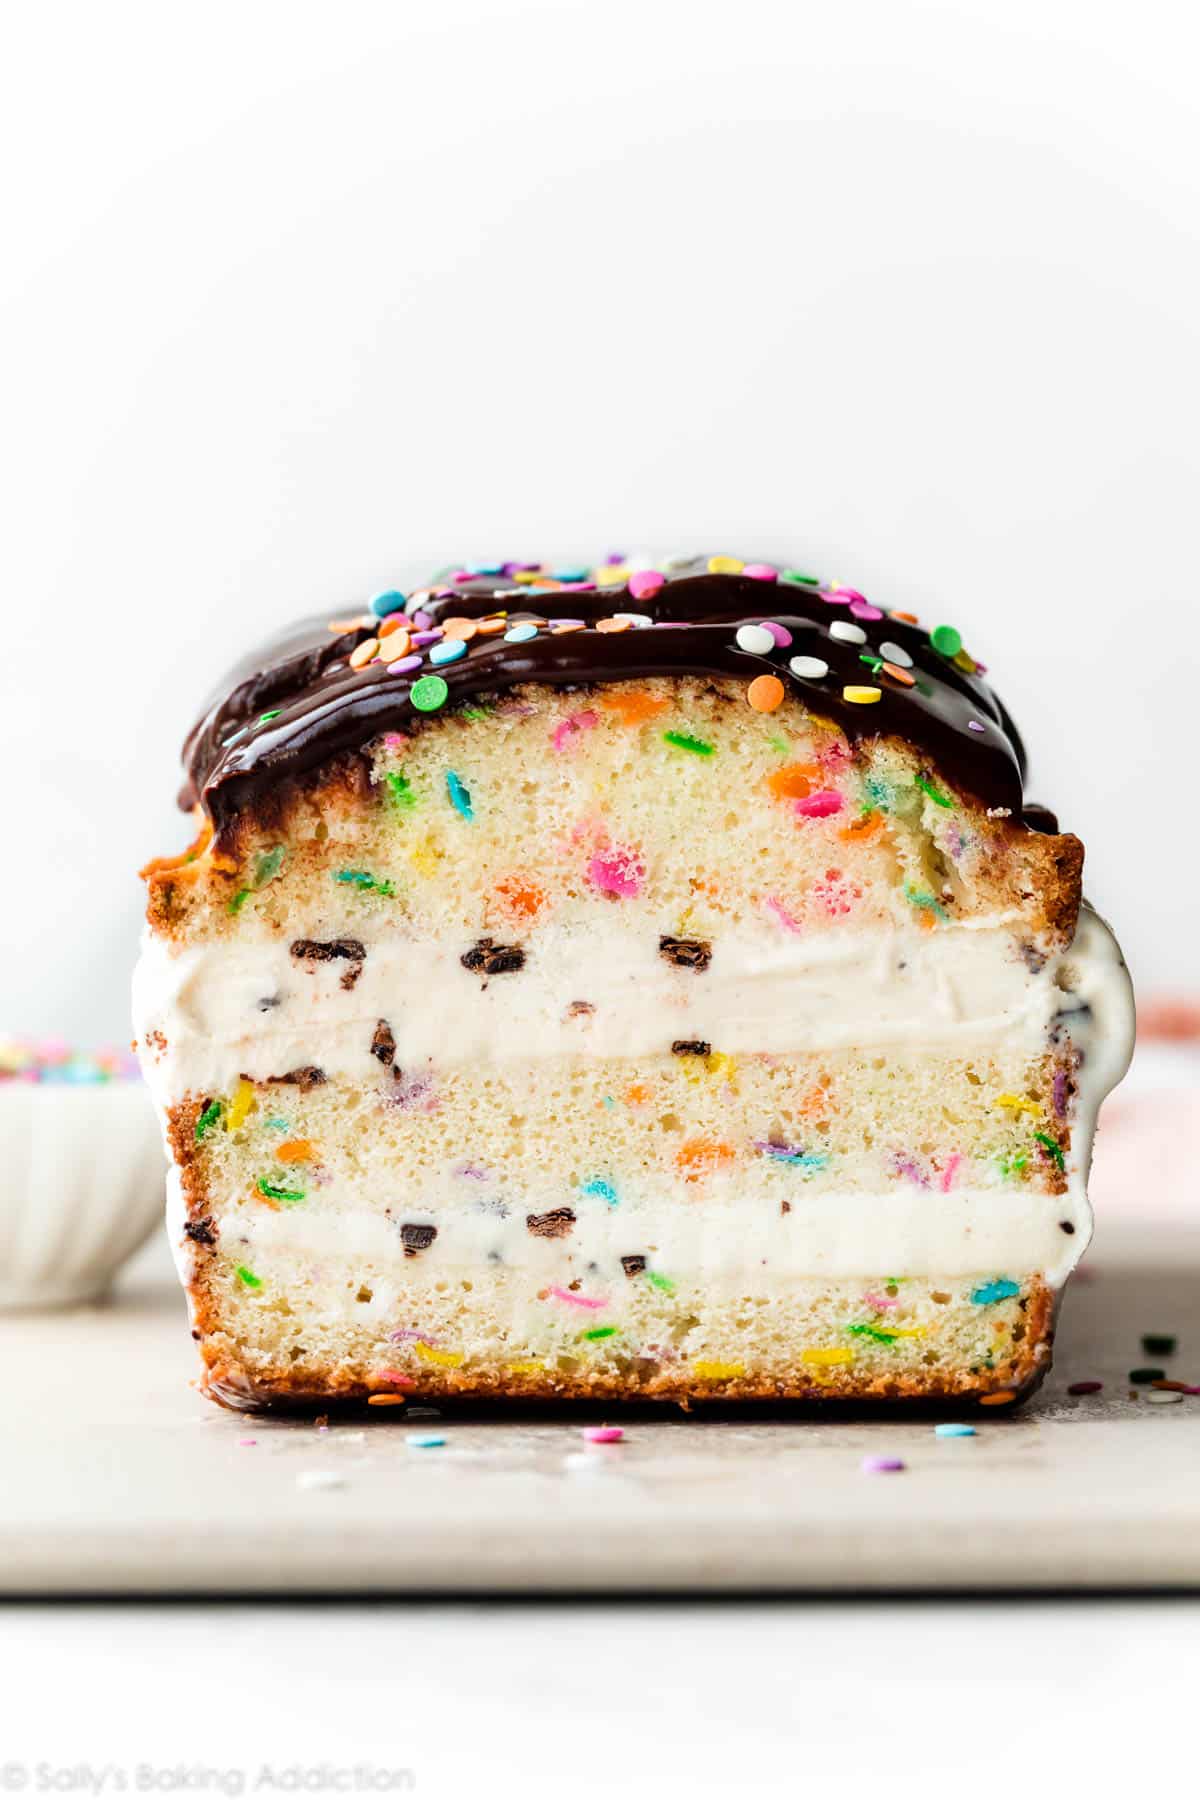 ice cream layered loaf cake with chocolate ganache and sprinkles